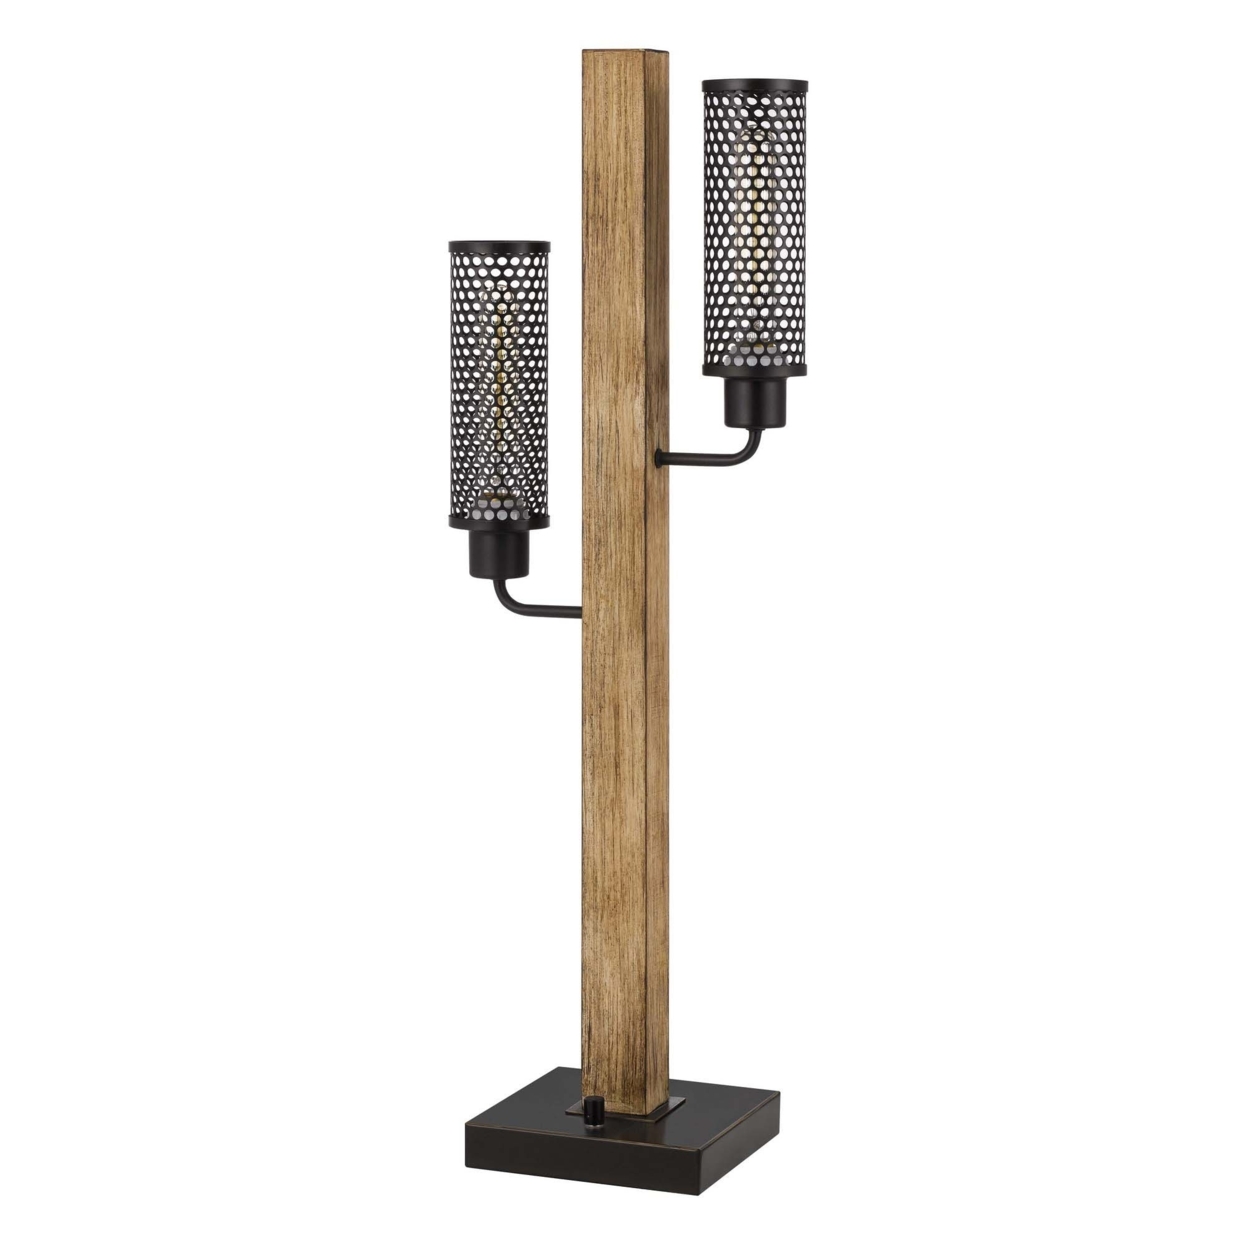 Wooden Table Lamp With 2 Metal Mesh Shades, Brown And Black- Saltoro Sherpi